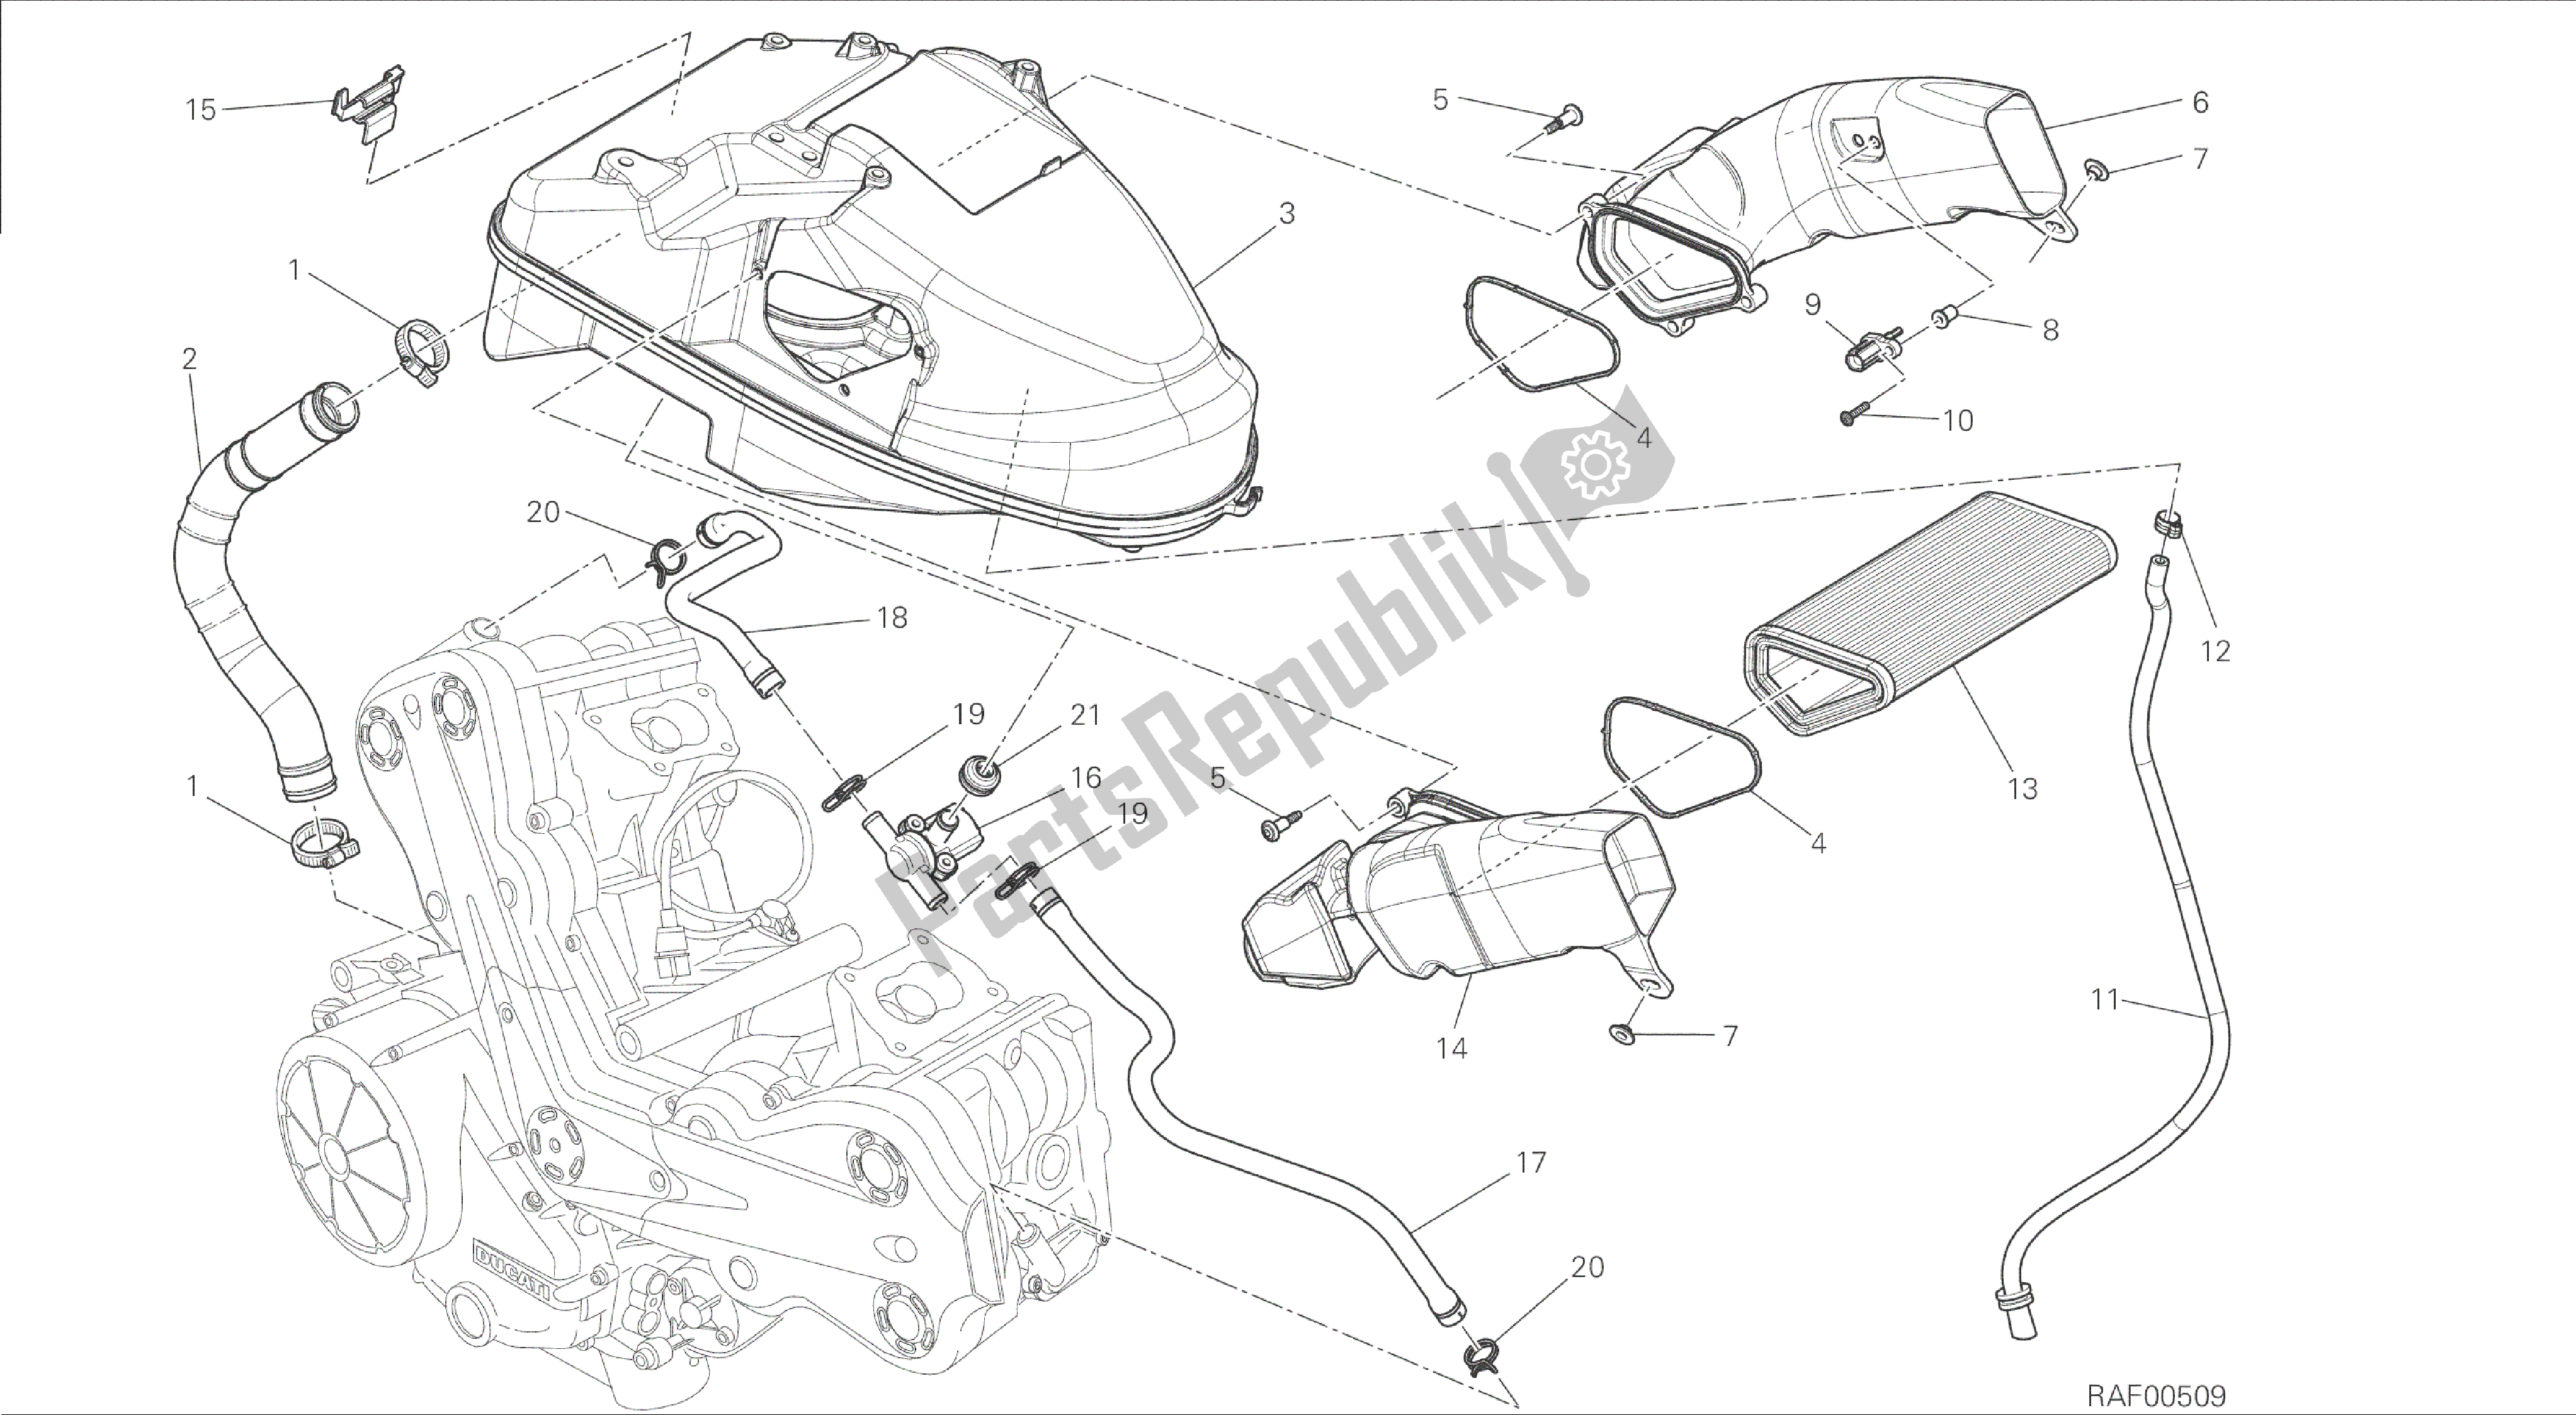 All parts for the Drawing 029 - Intake [mod:dvl]group Frame of the Ducati Diavel 1200 2015